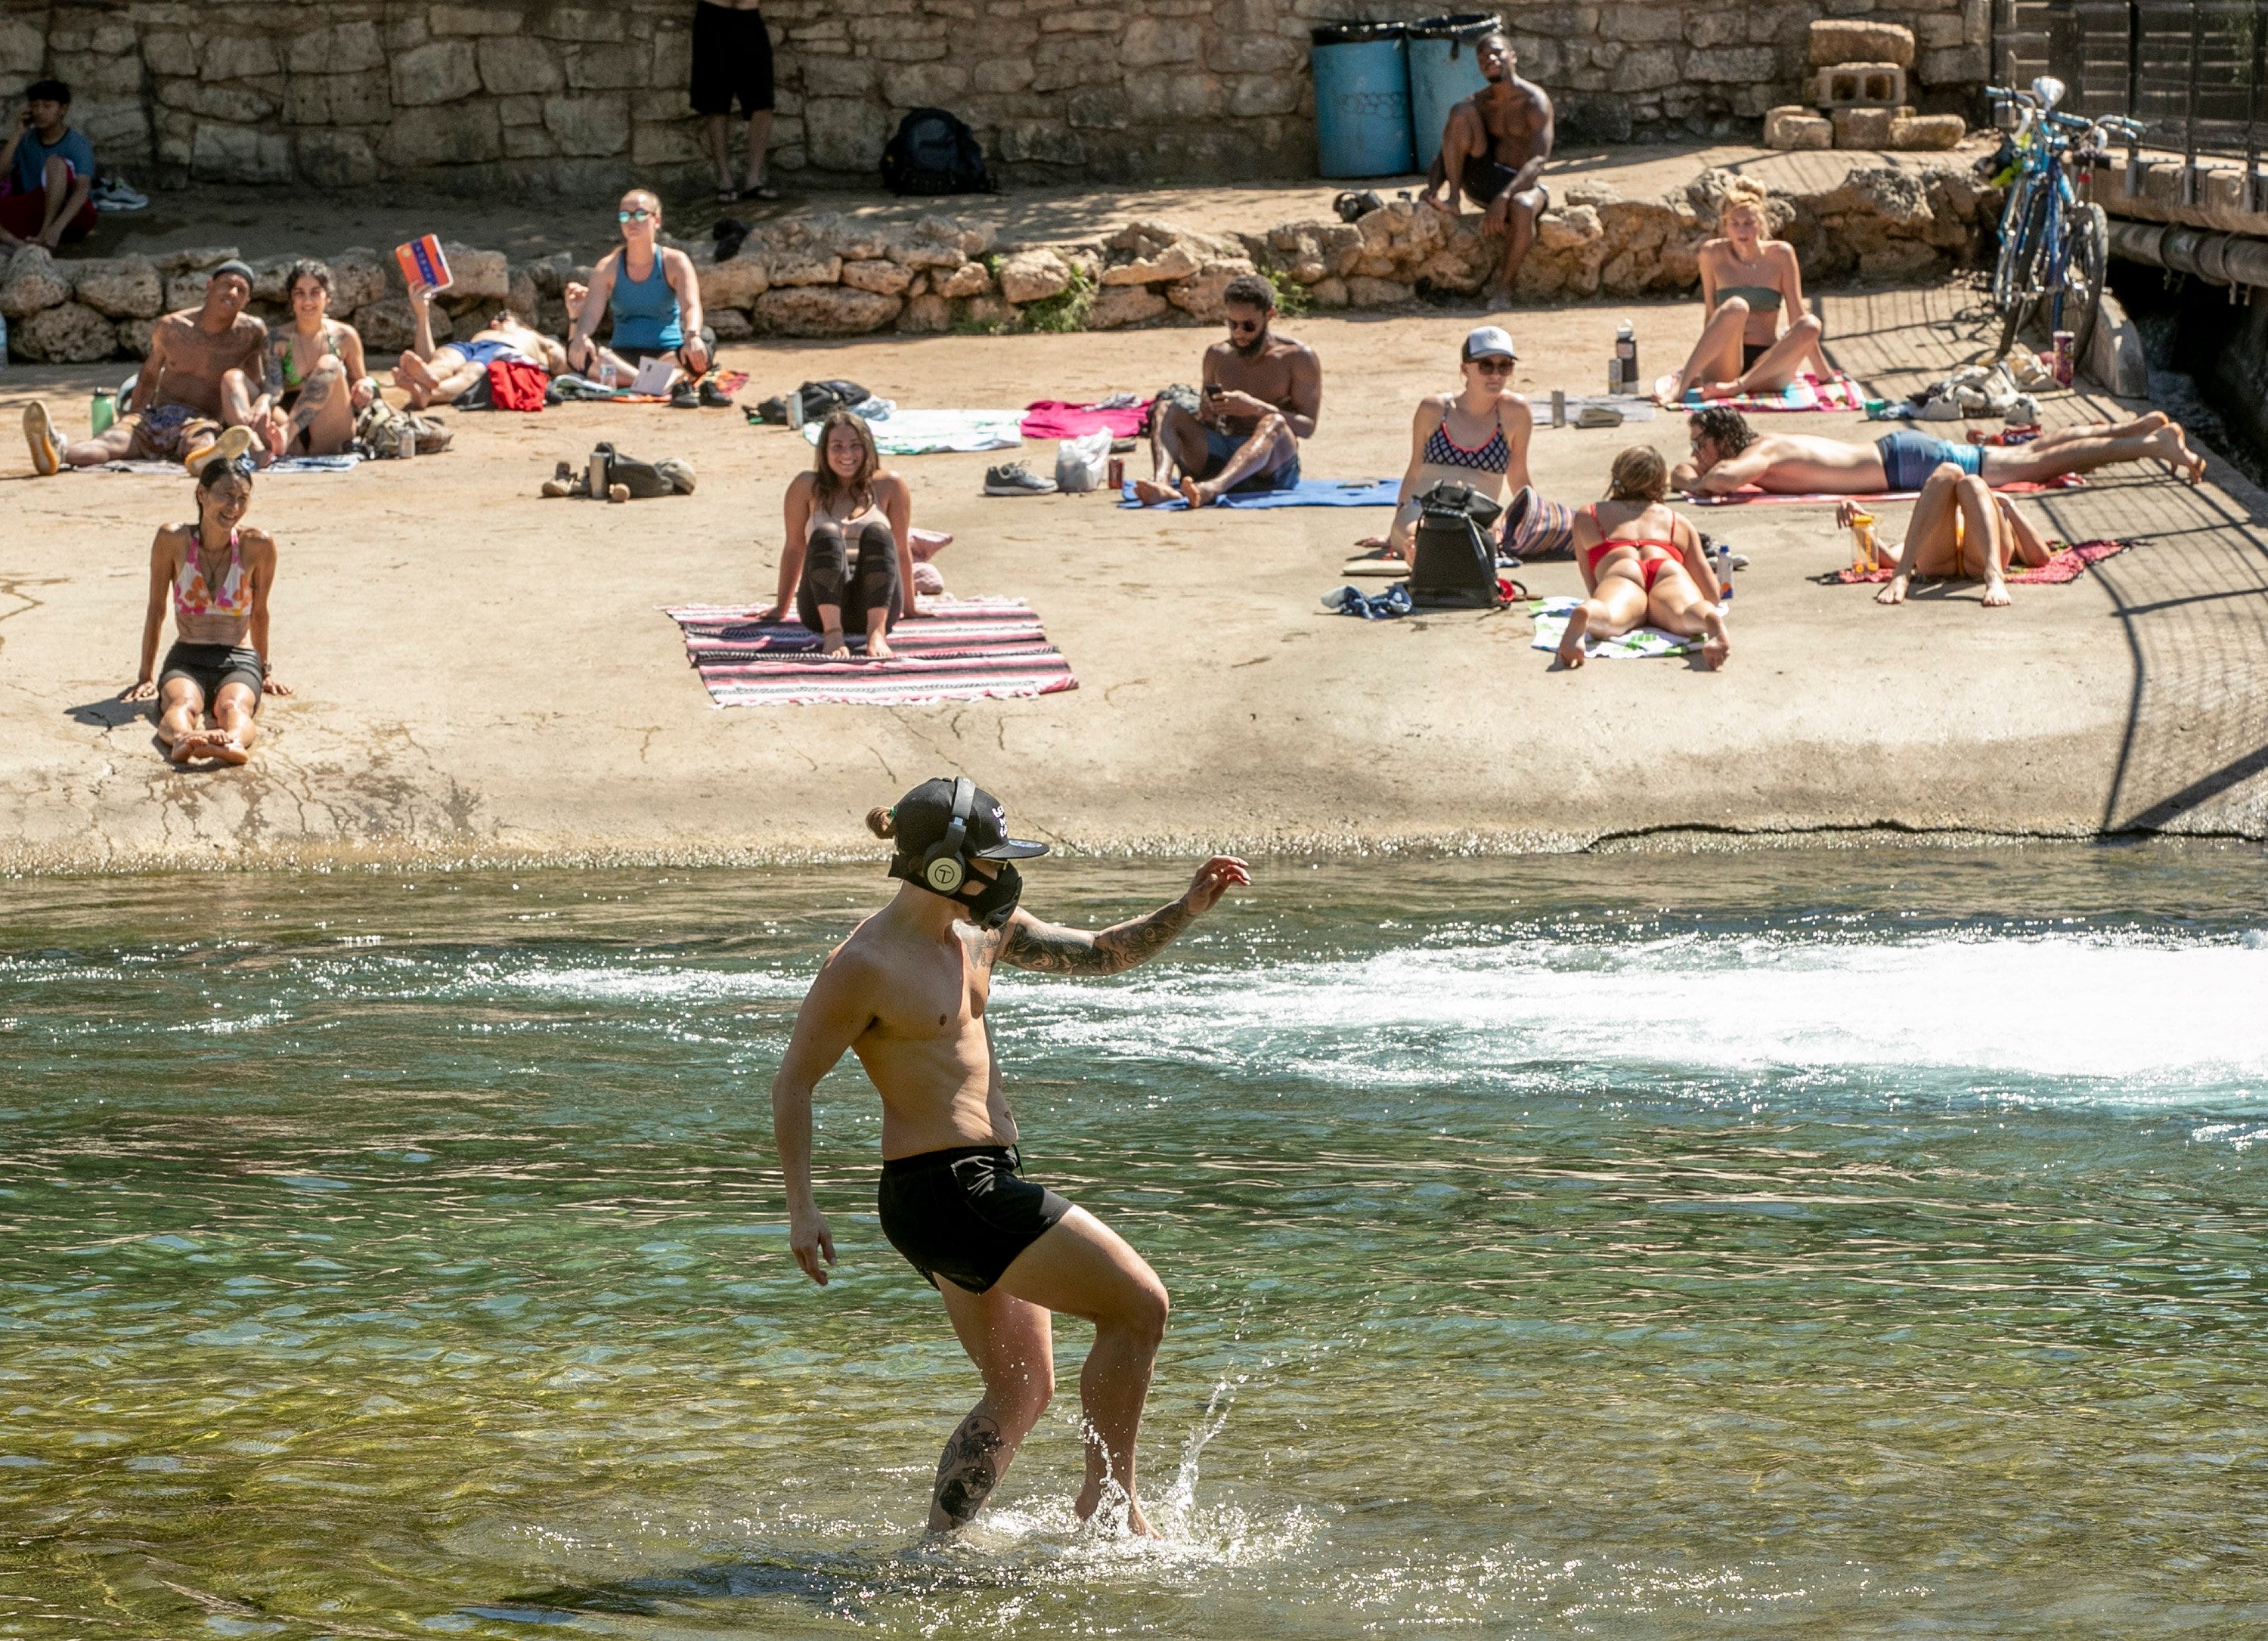 Kristopher McCoy frolics in the cool waters of Barton Creek on March 25, 2020. The Austin area now faces the possibility of returning to its strictest levels of COVID-19 guidelines.